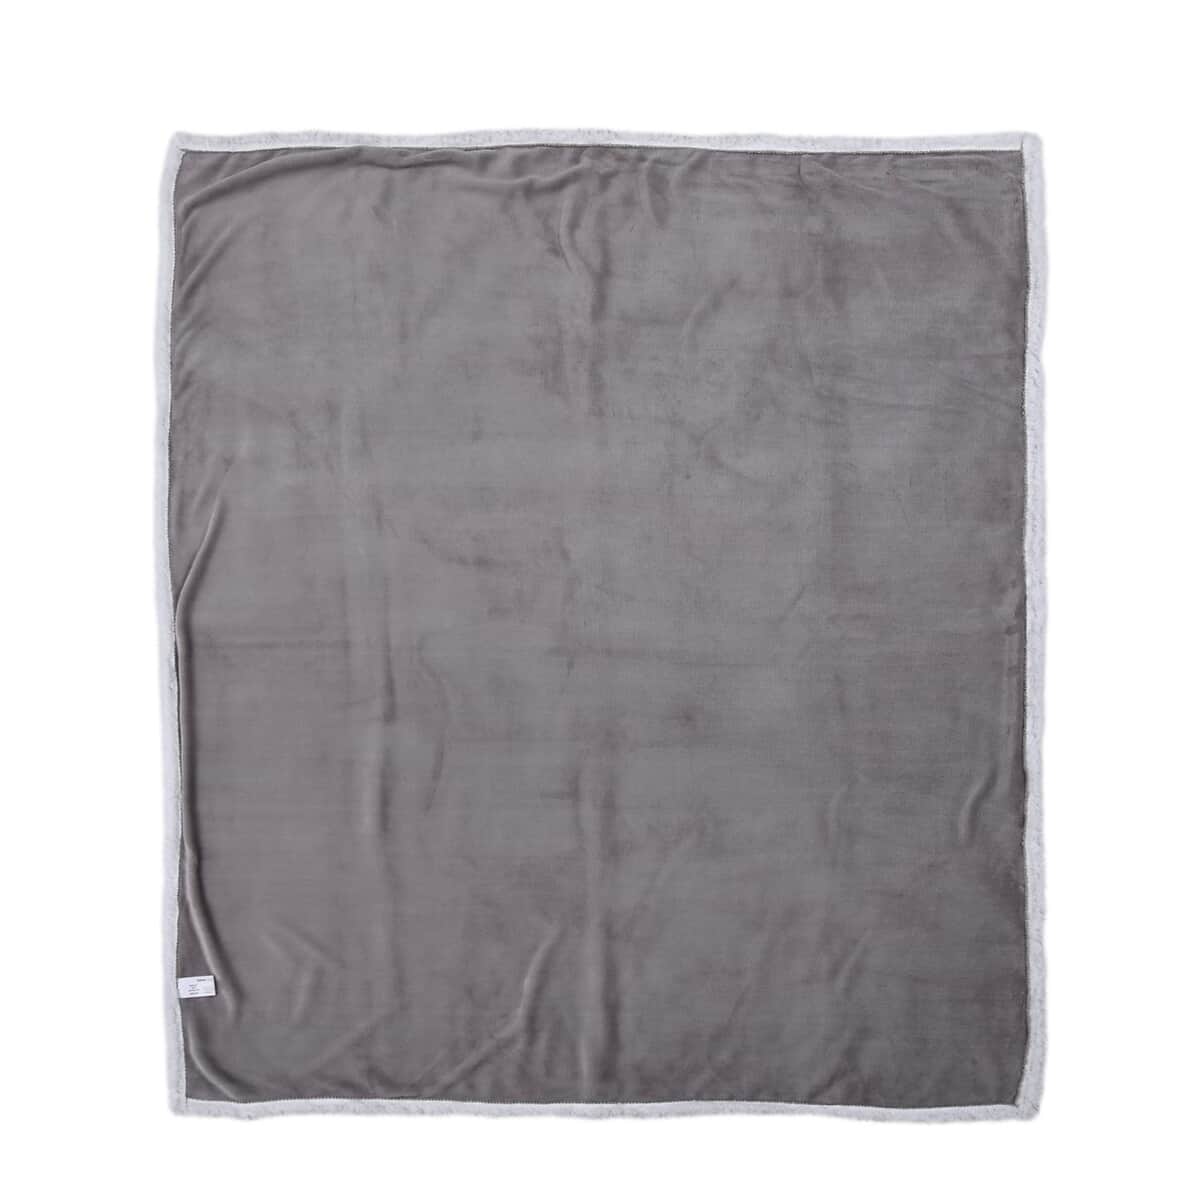 HOMESMART Light Gray Microfiber Flannel with Sherpa Blanket image number 1